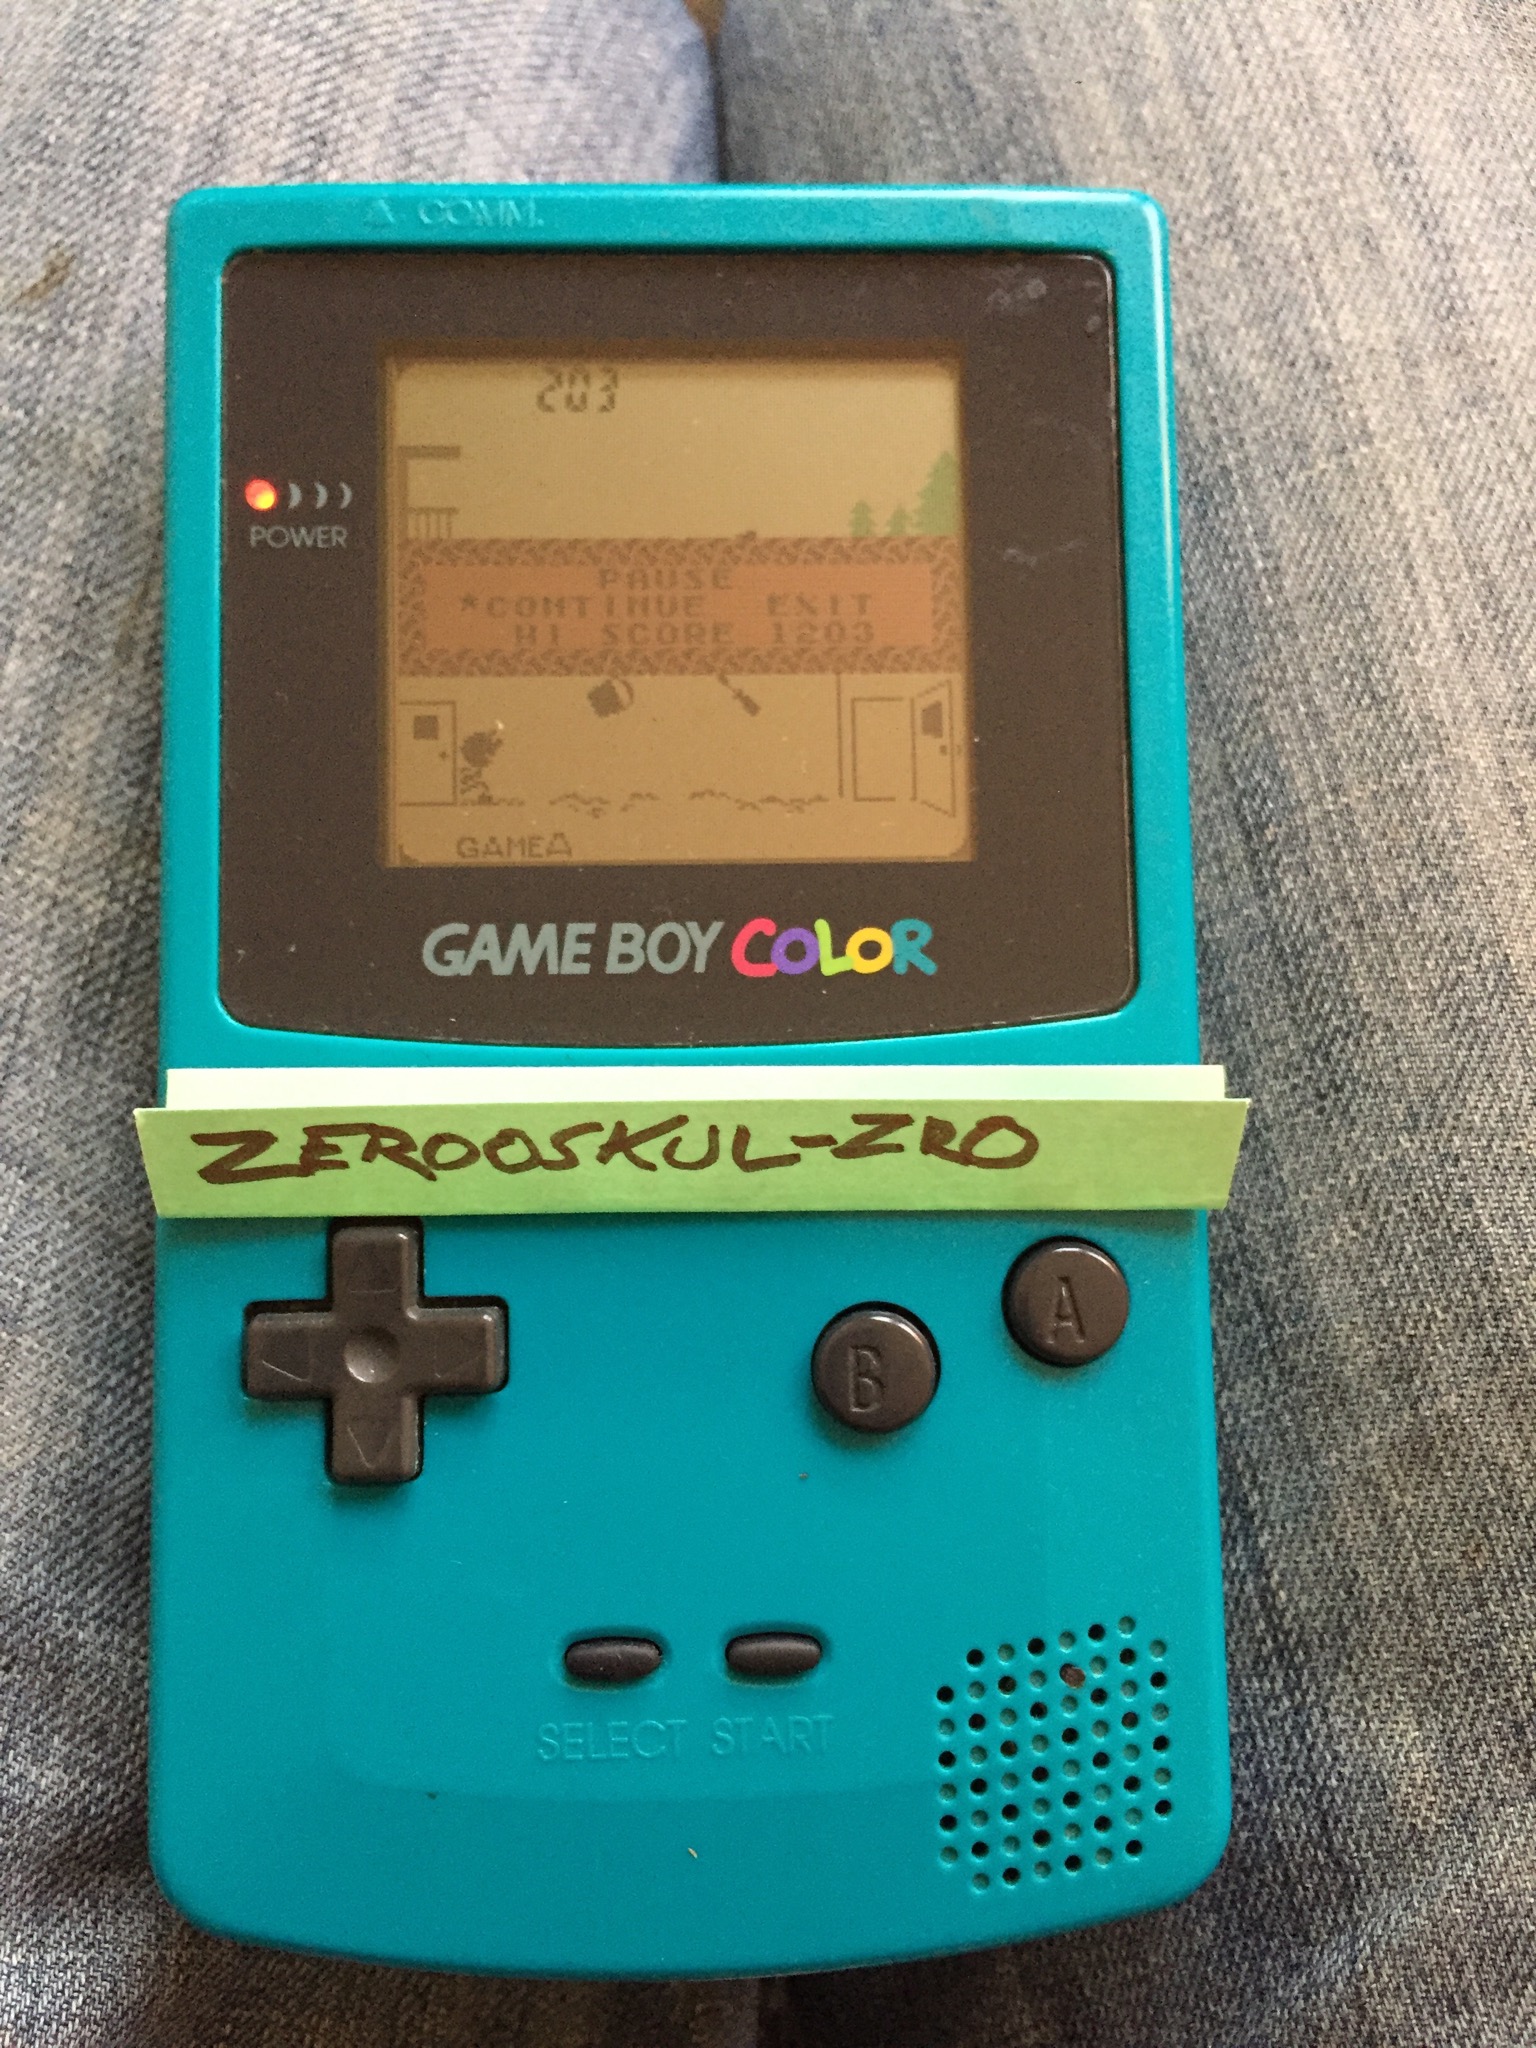 zerooskul: Game & Watch Gallery 2: Helmet: Classic: Easy (Game Boy Color) 1,380 points on 2018-06-29 10:43:49